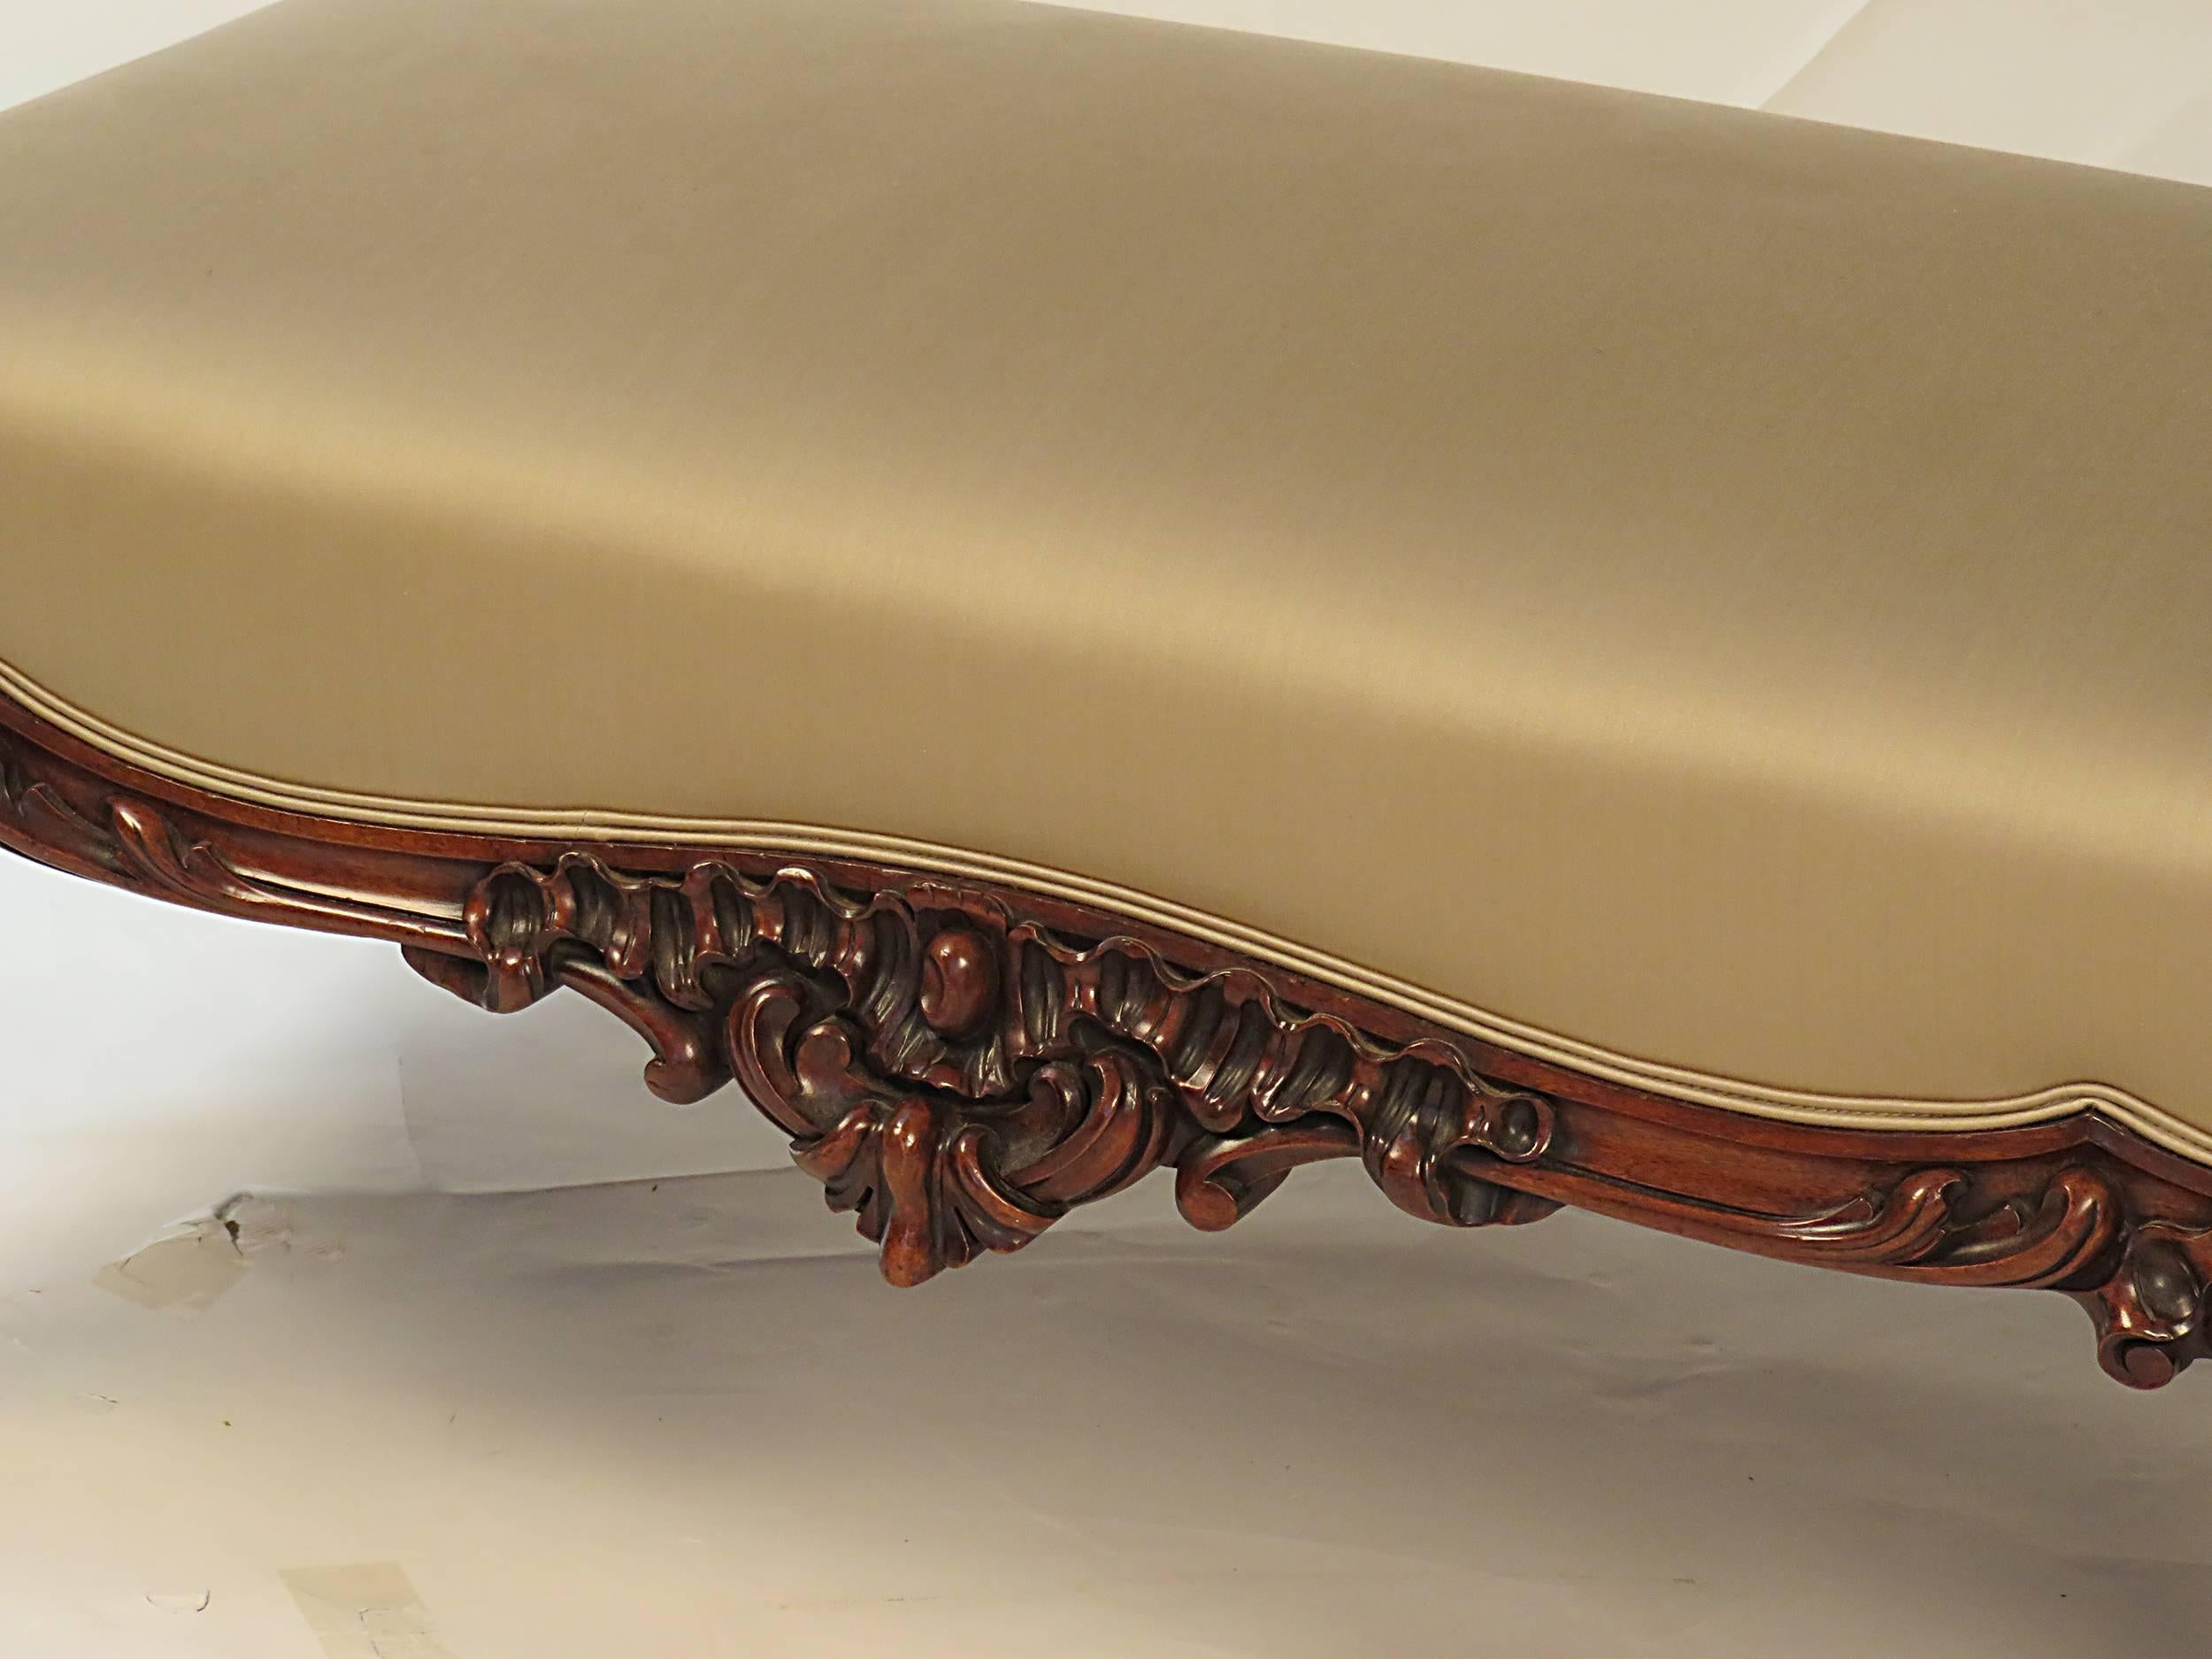 An unusually large Victorian English Rococo Revival ottoman made circa 1870. Exceptional carved details with rich Rococo flourishes. The color is a warm rich walnut tone and is possibly faded rosewood. The large size is a real rarity. Recently